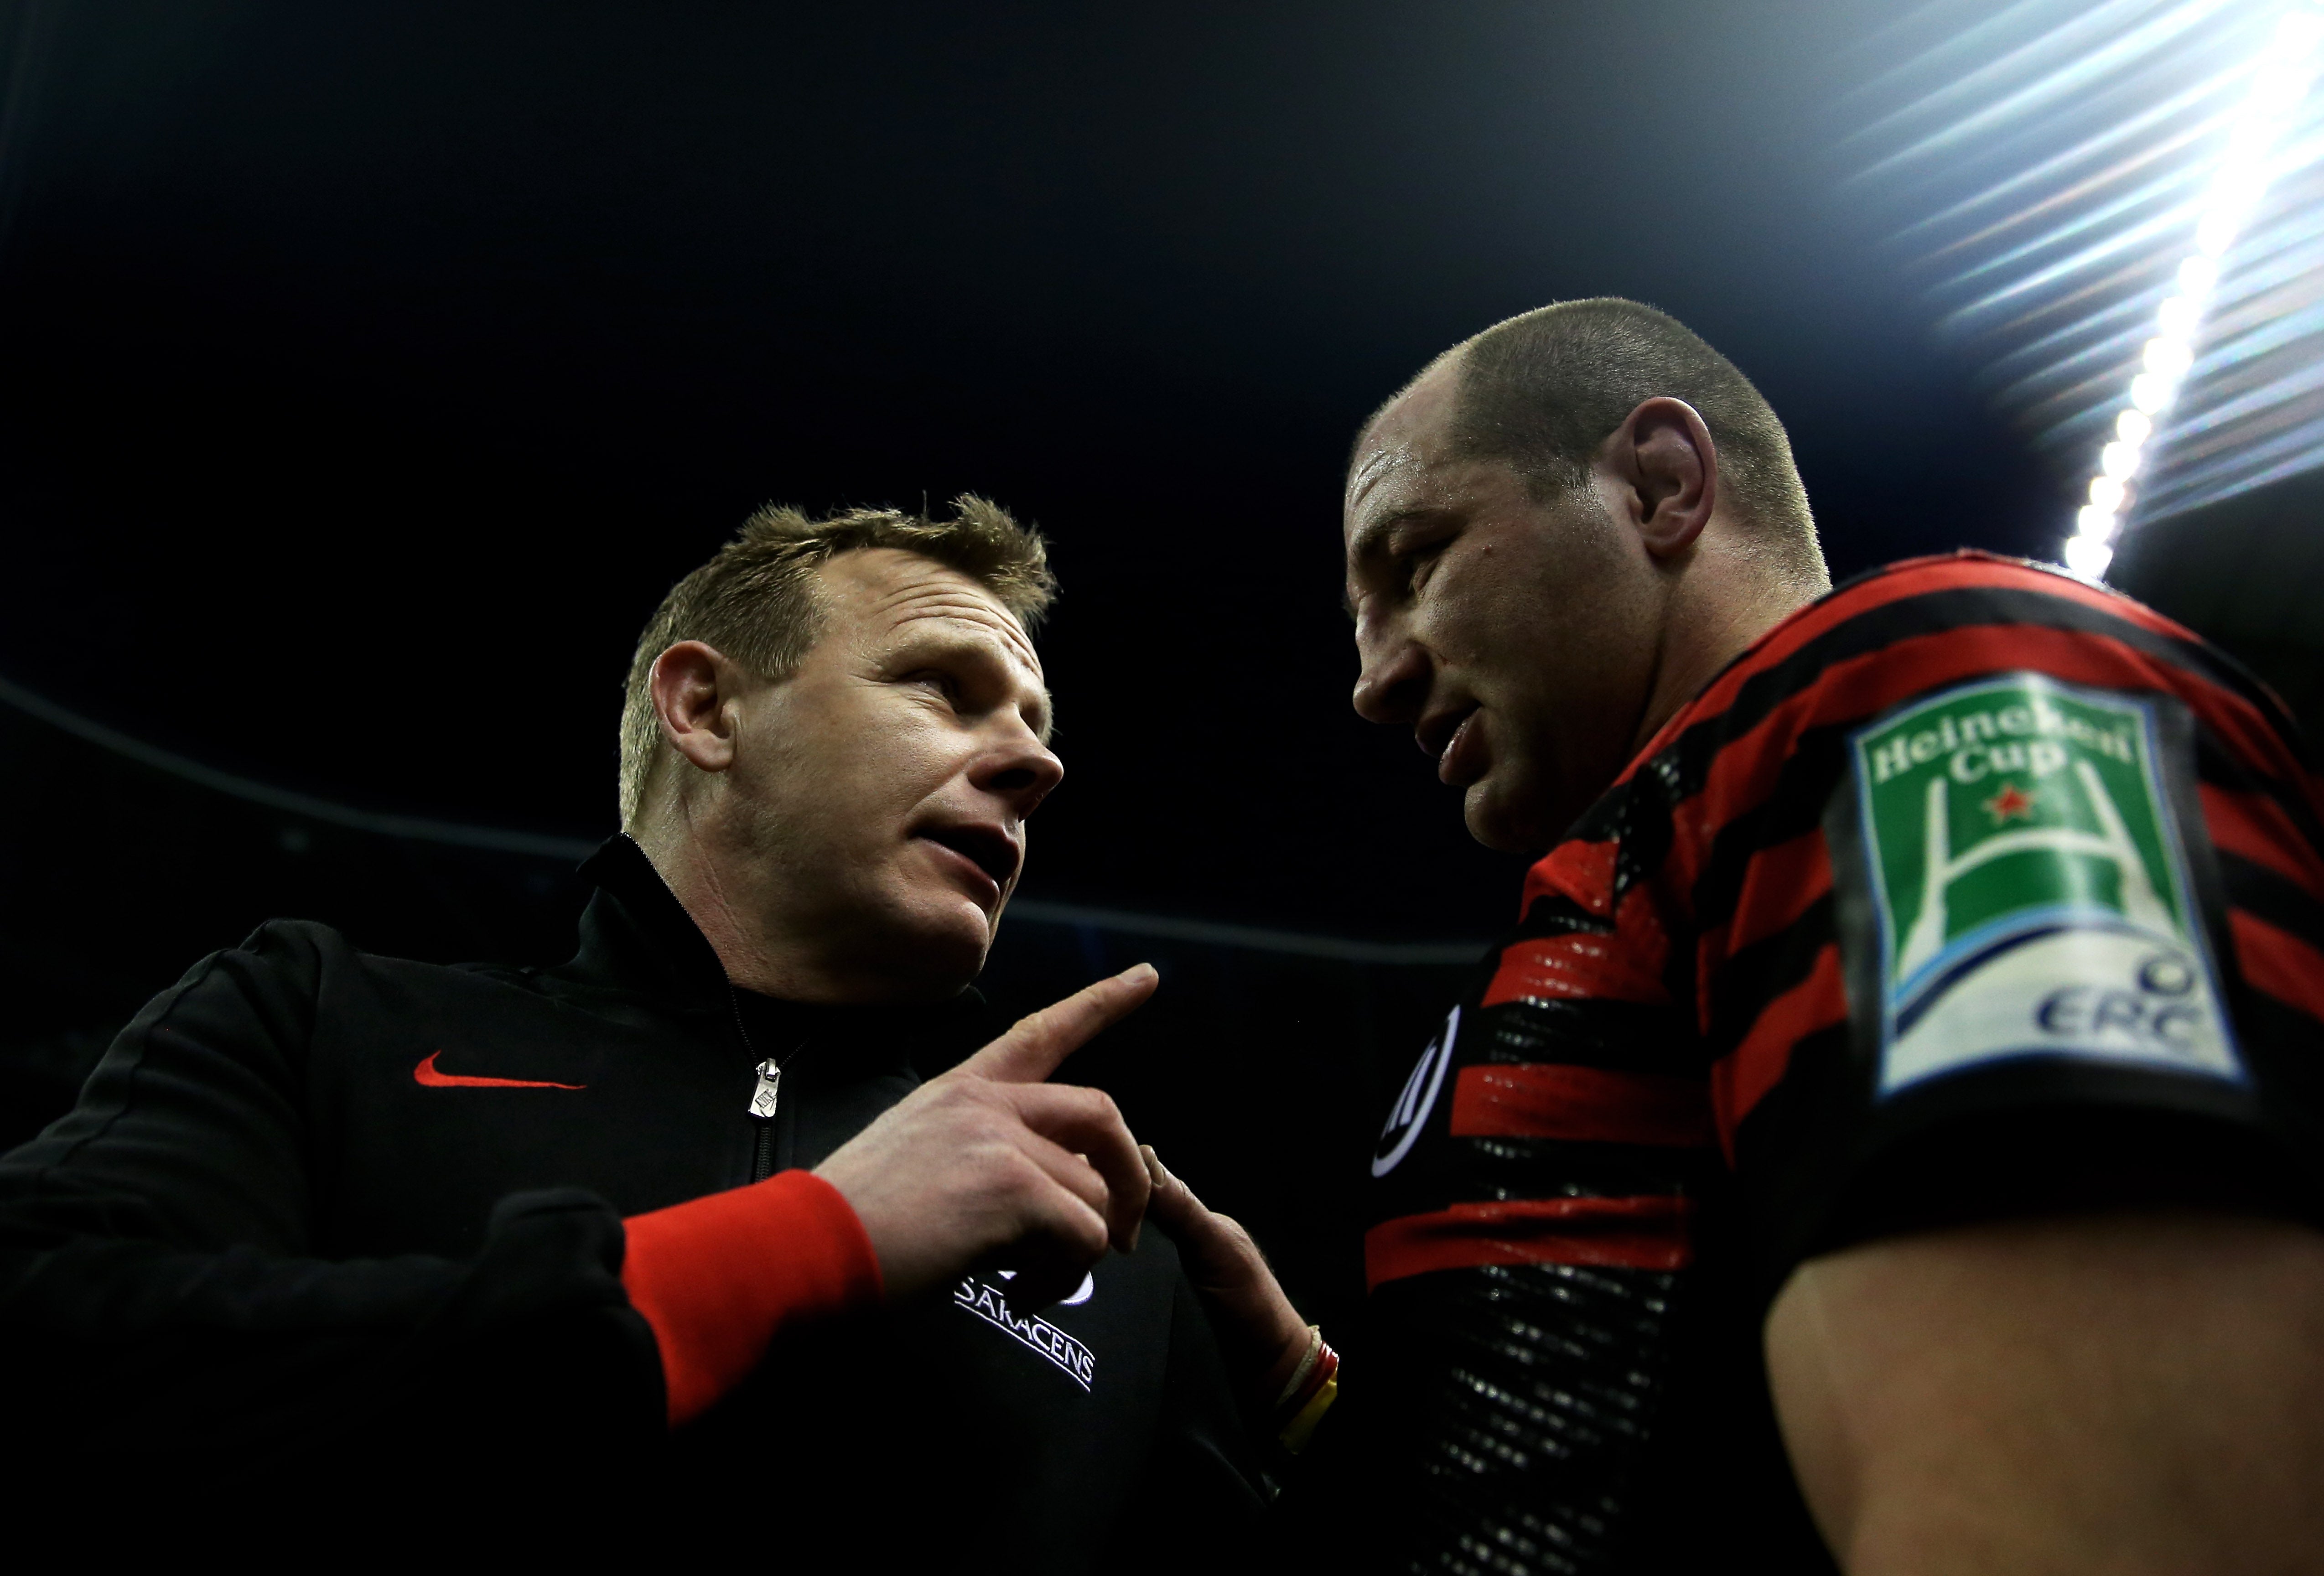 Steve Borthwick spent a large part of his career playing for Saracens